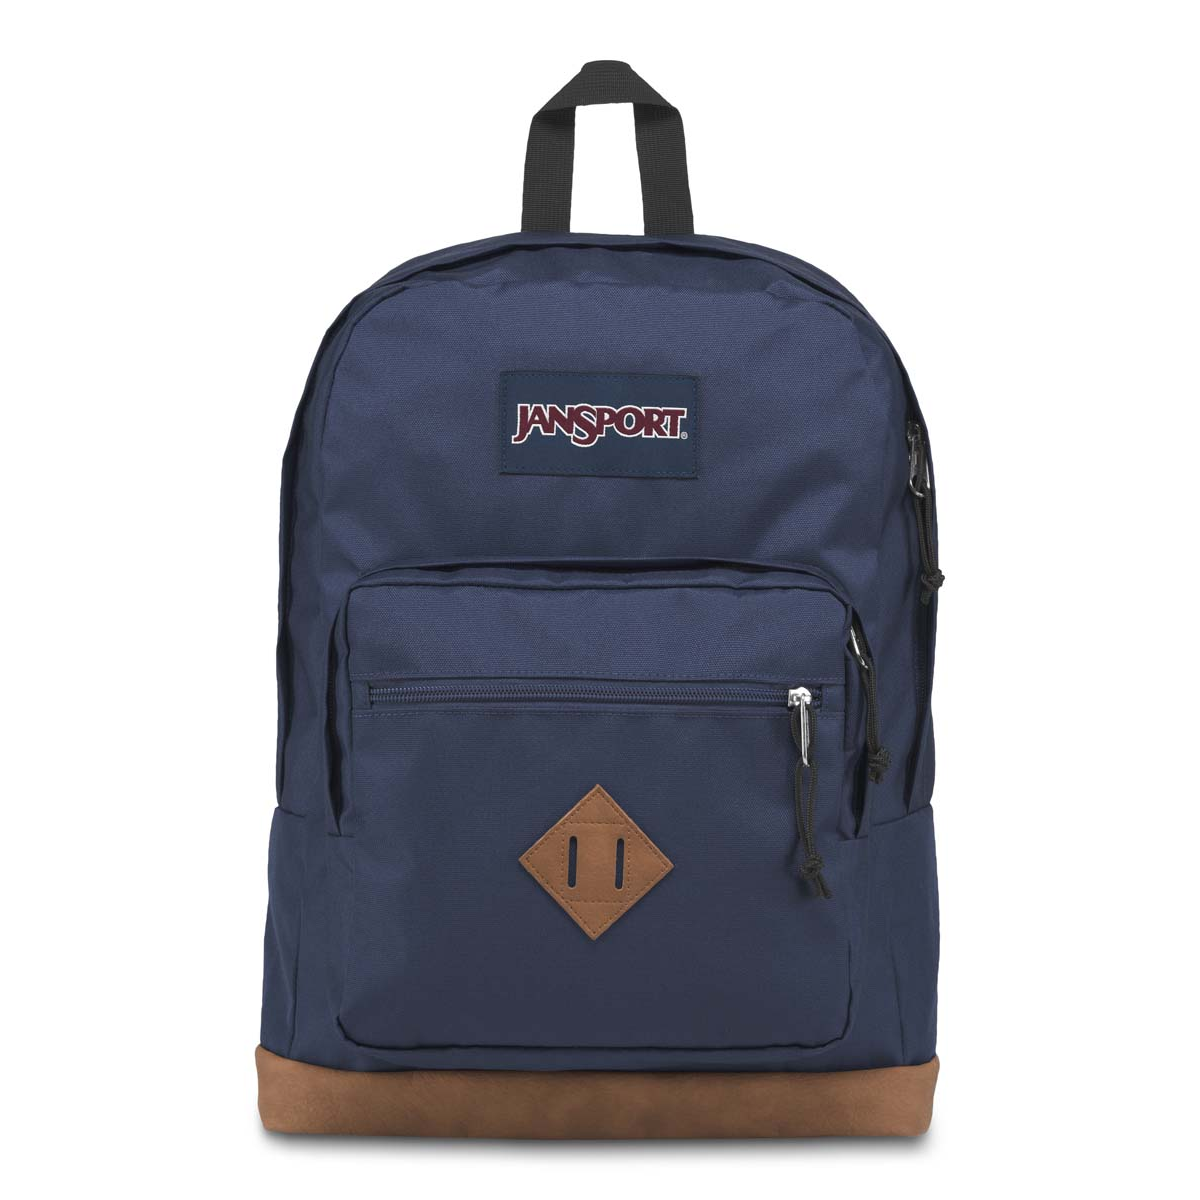 JanSport City View Backpack Front View